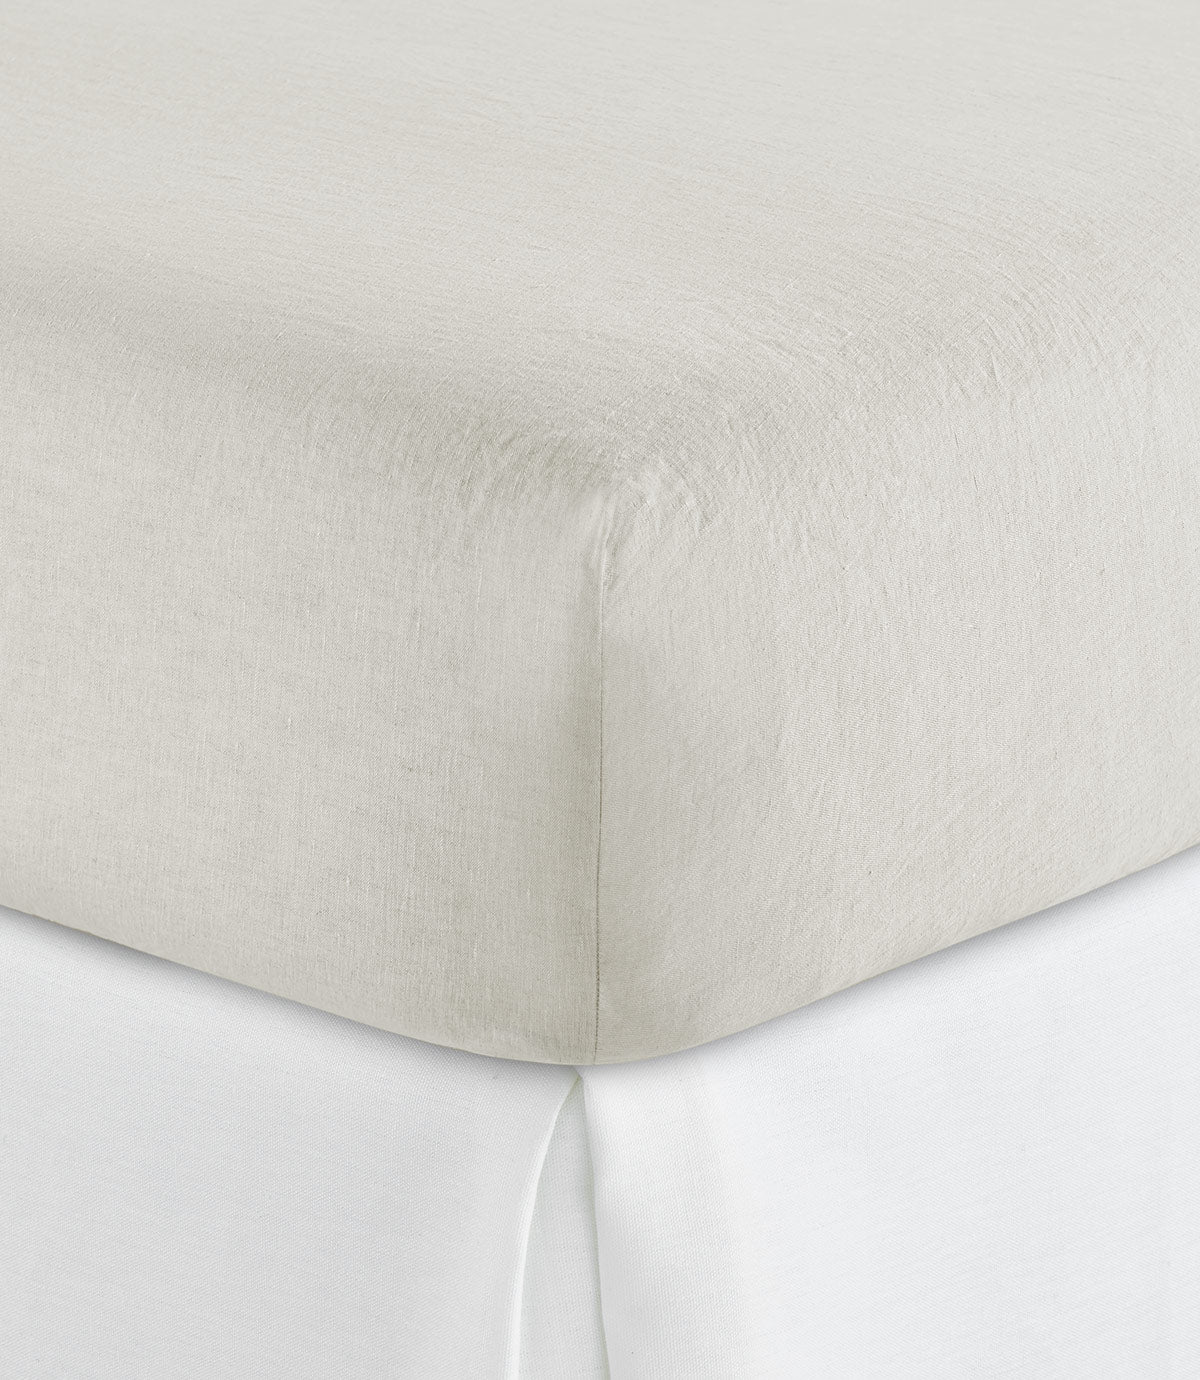 European Washed Linen Fitted Sheet, Natural